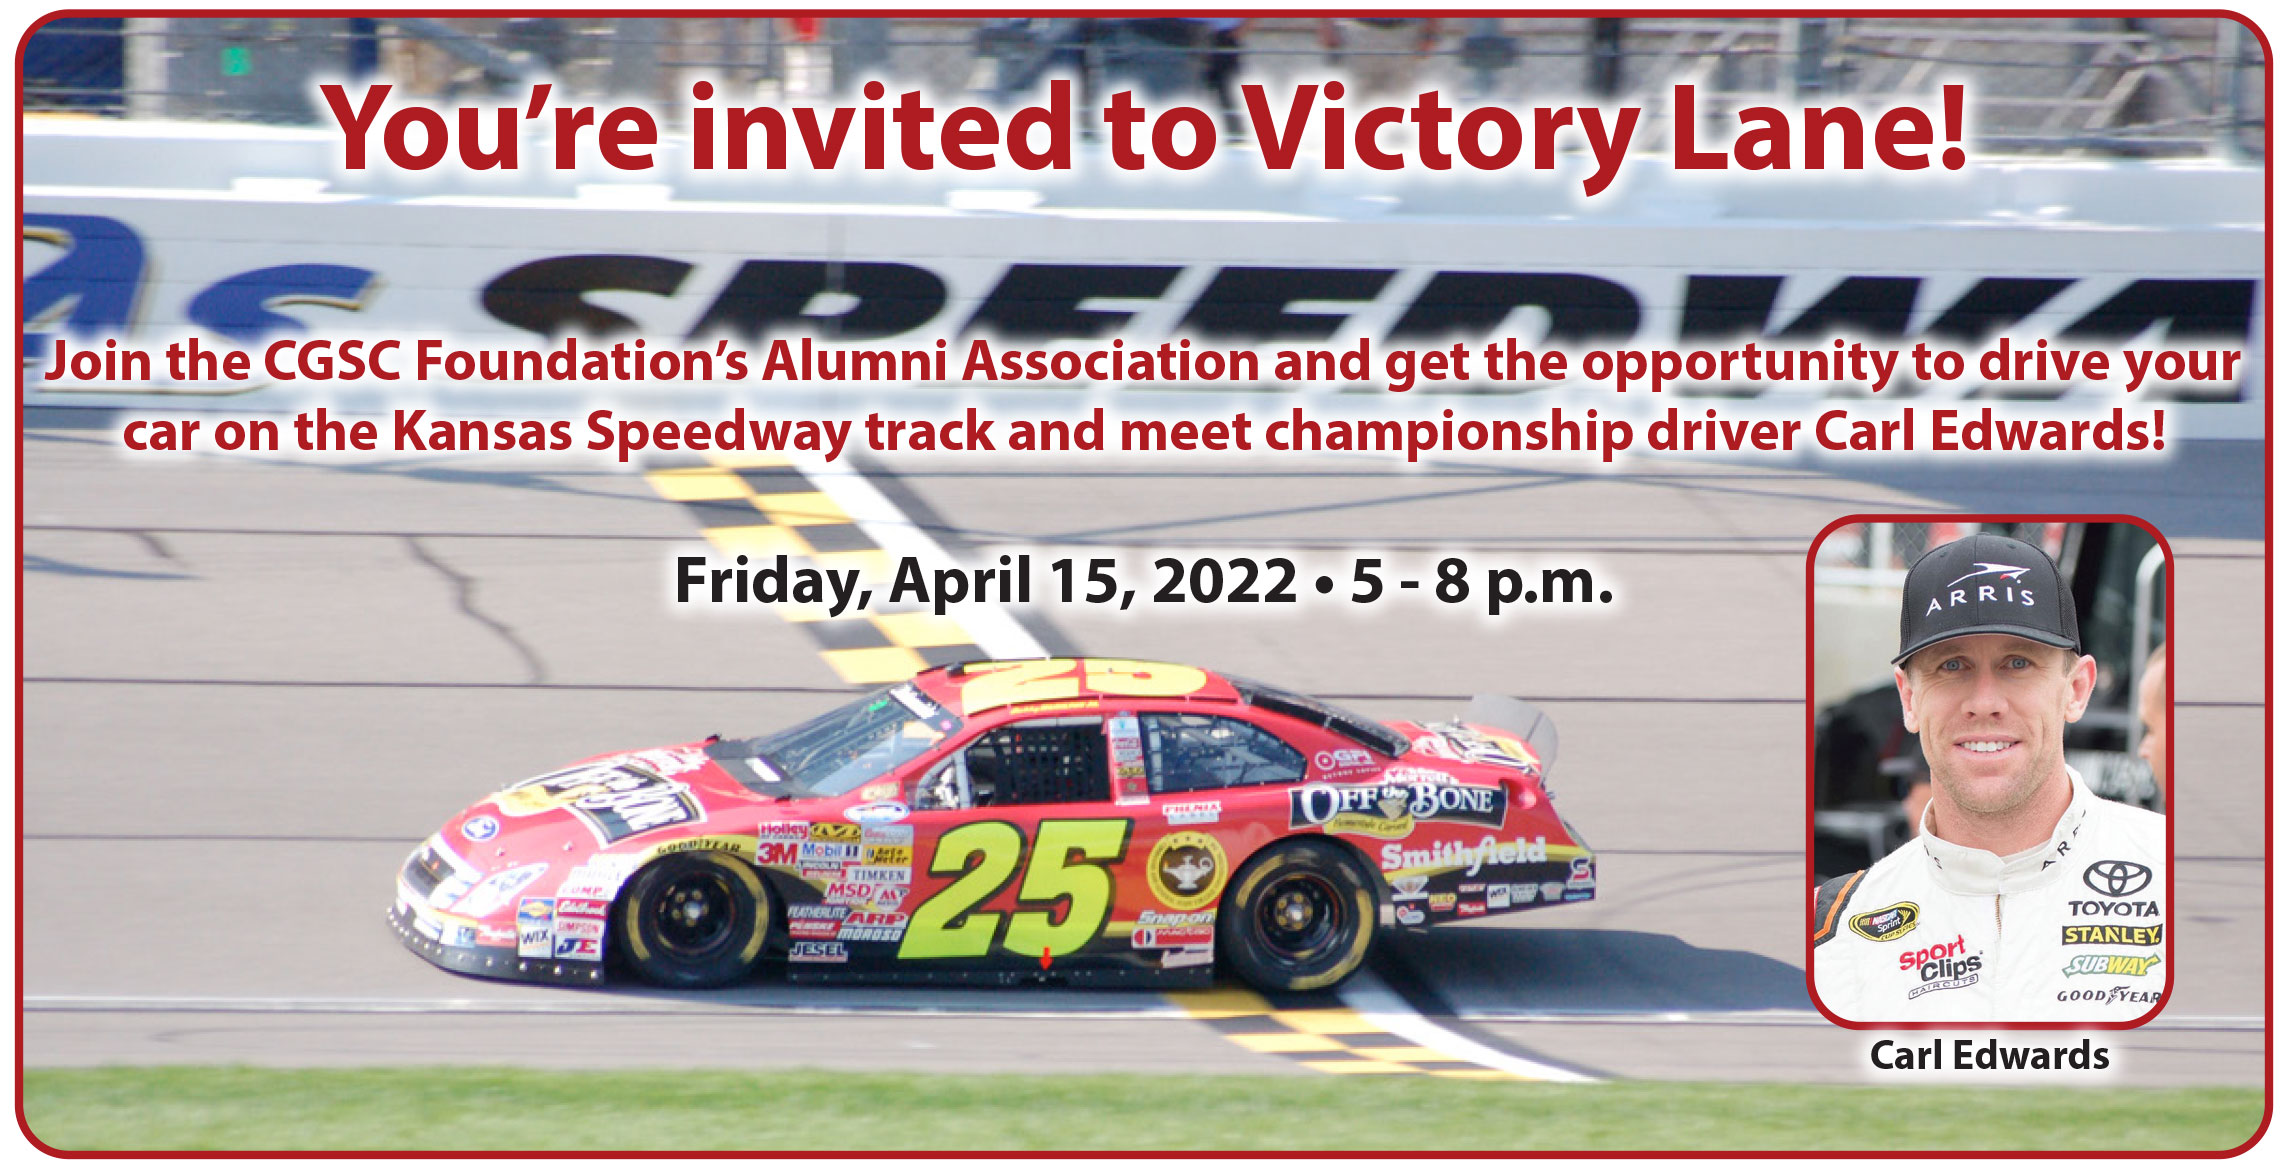 composite image– background is a photo of a NASCAR race car on the Kansas Speedway track. Over the photo background is the text inviting students, faculty and alumni to join the alumni association and get the opportunity to drive on the track and meet Carl Edwards